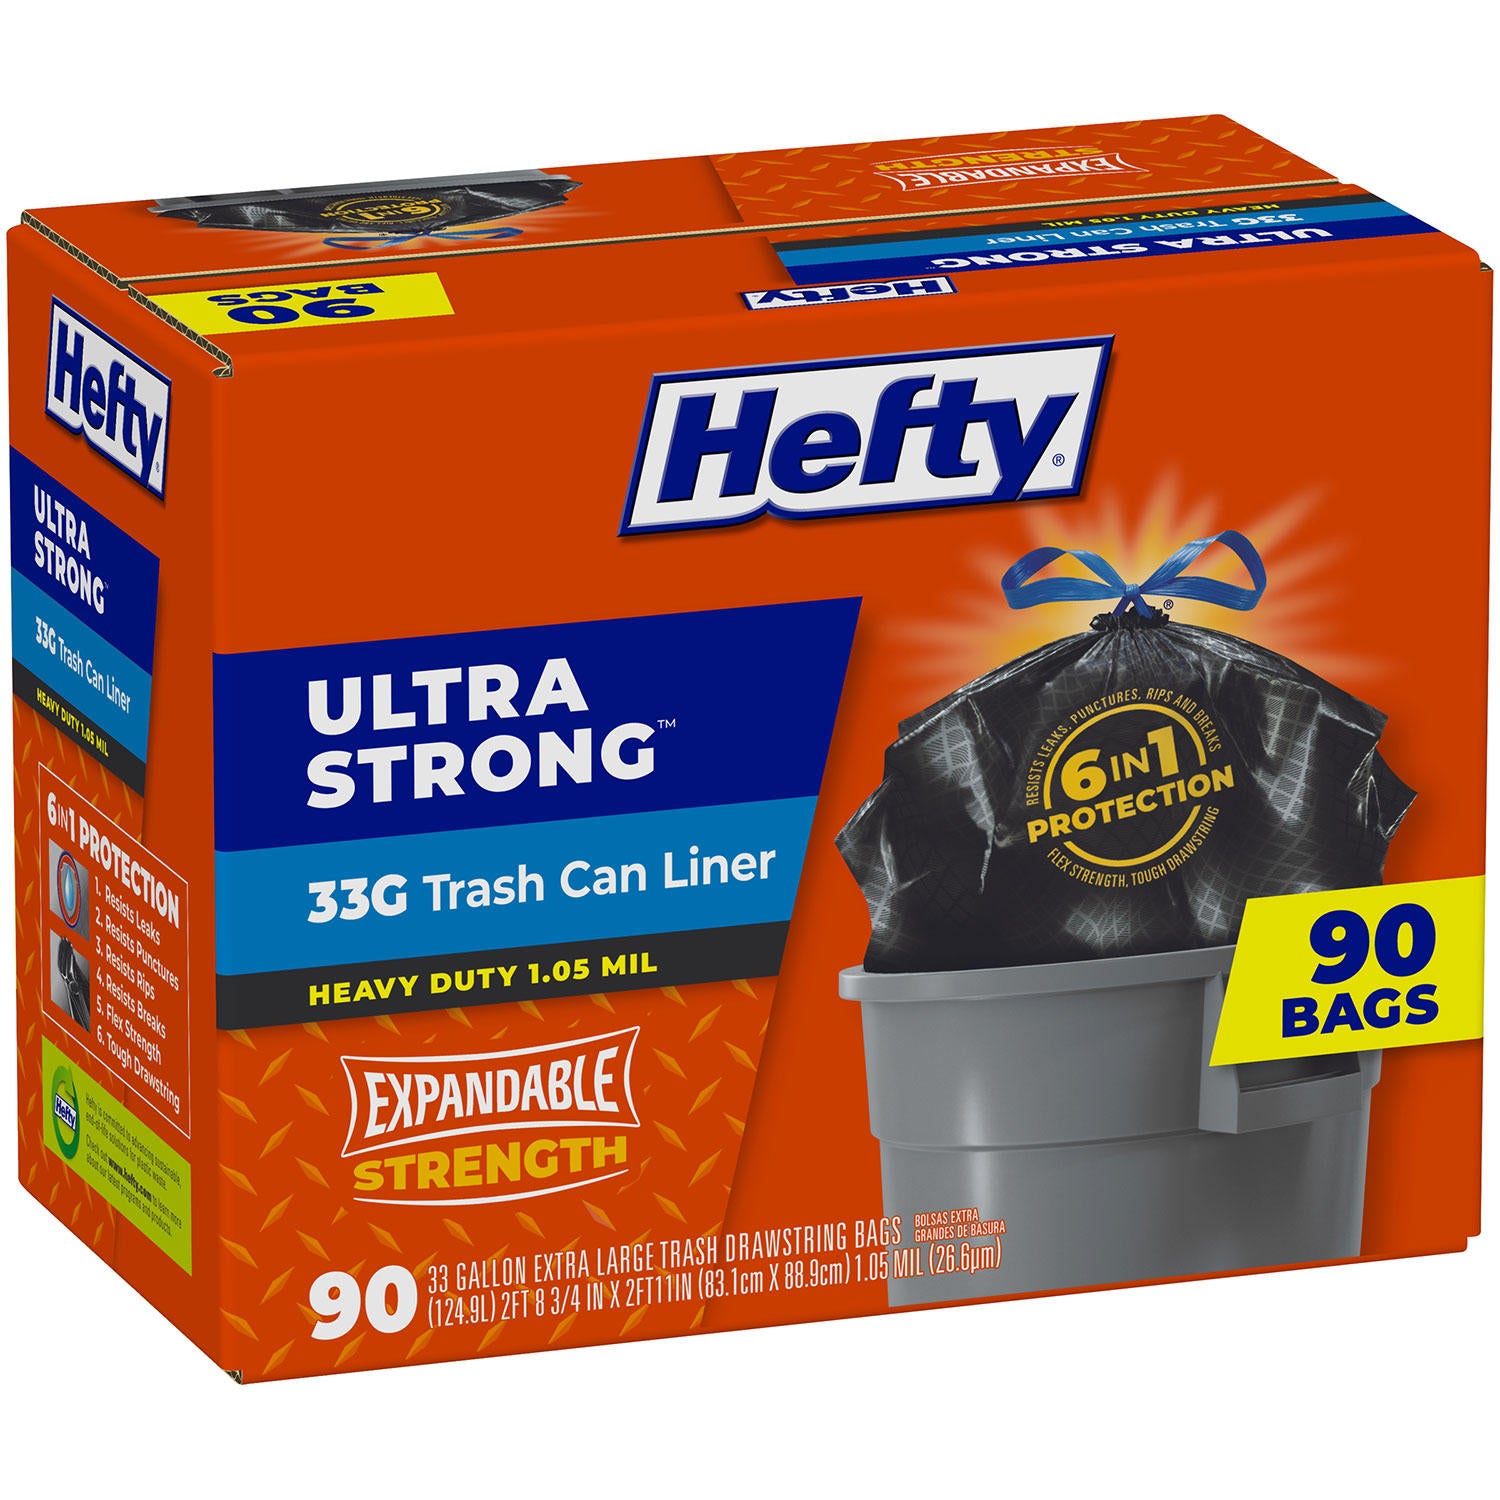 Contractor Trash Bags, Heavy Duty-Wholesale Prices-USA made